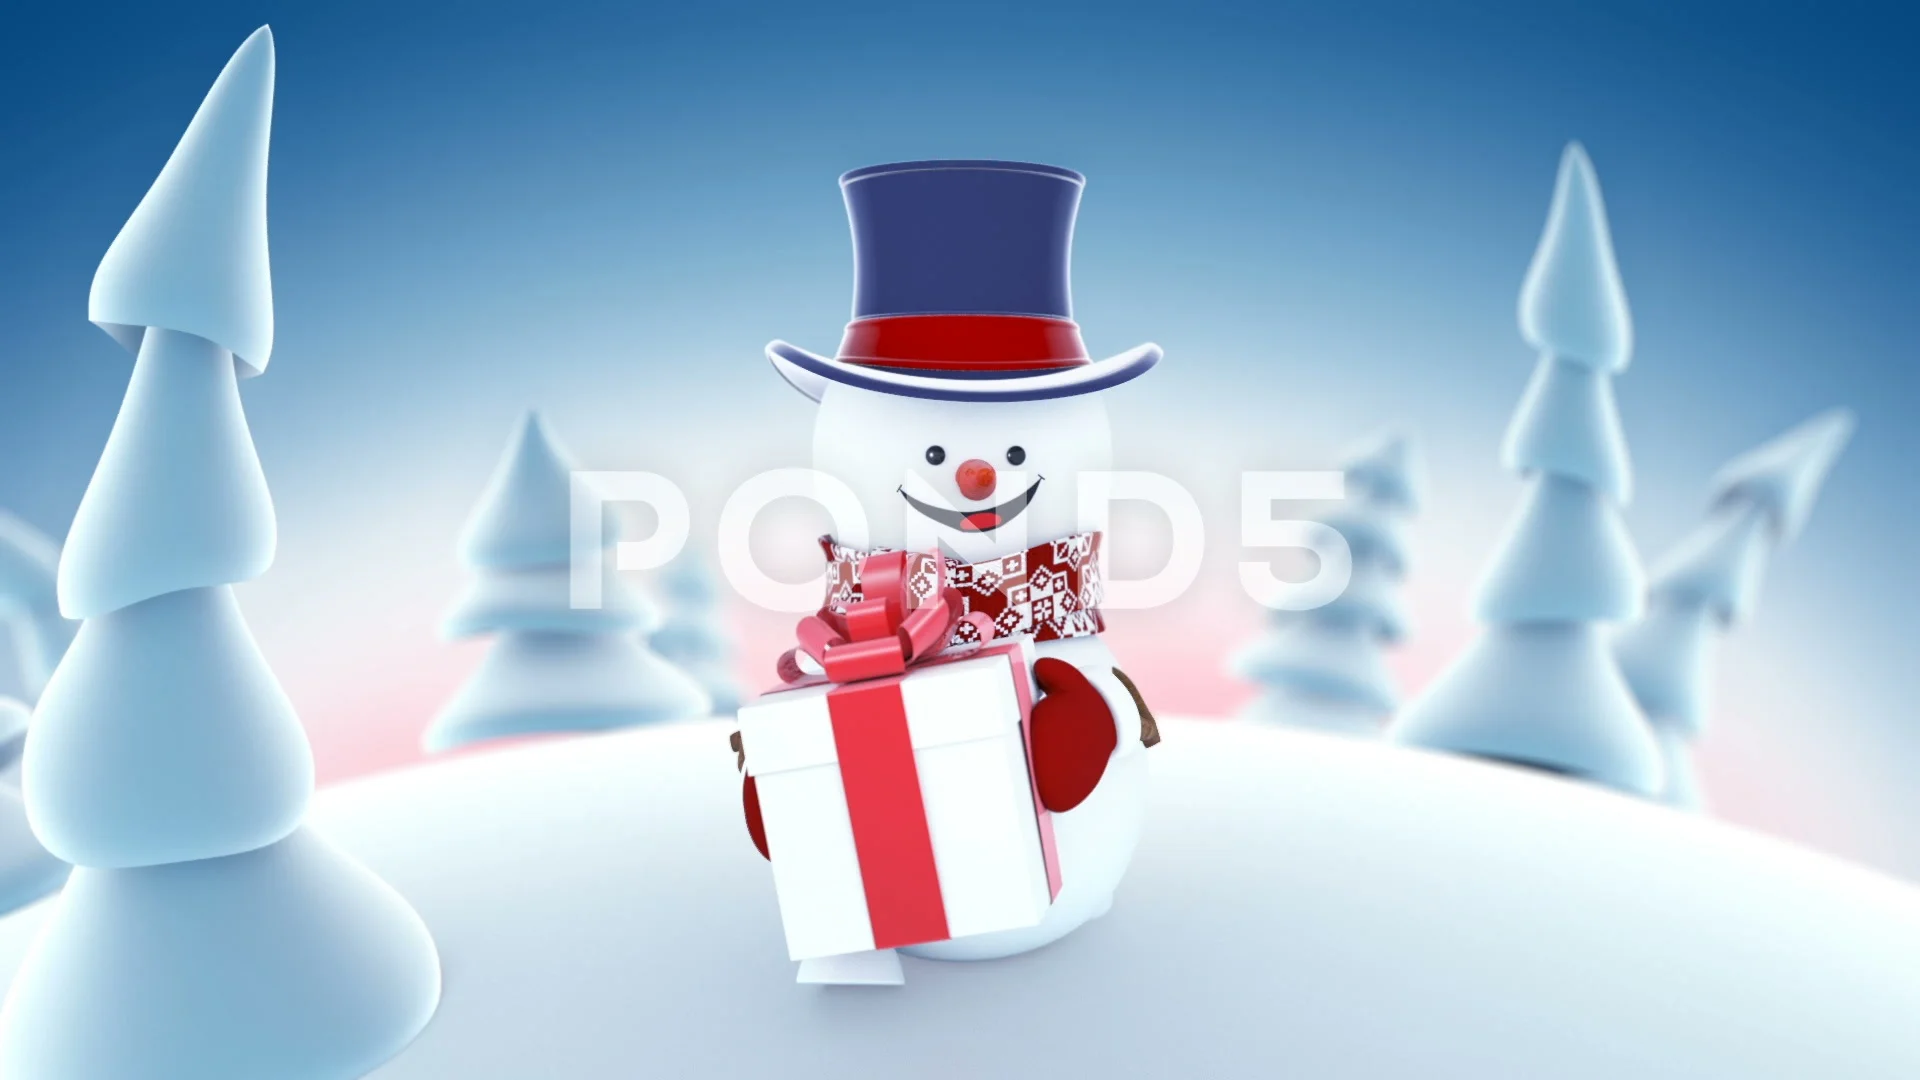 funny snowman pictures cartoon